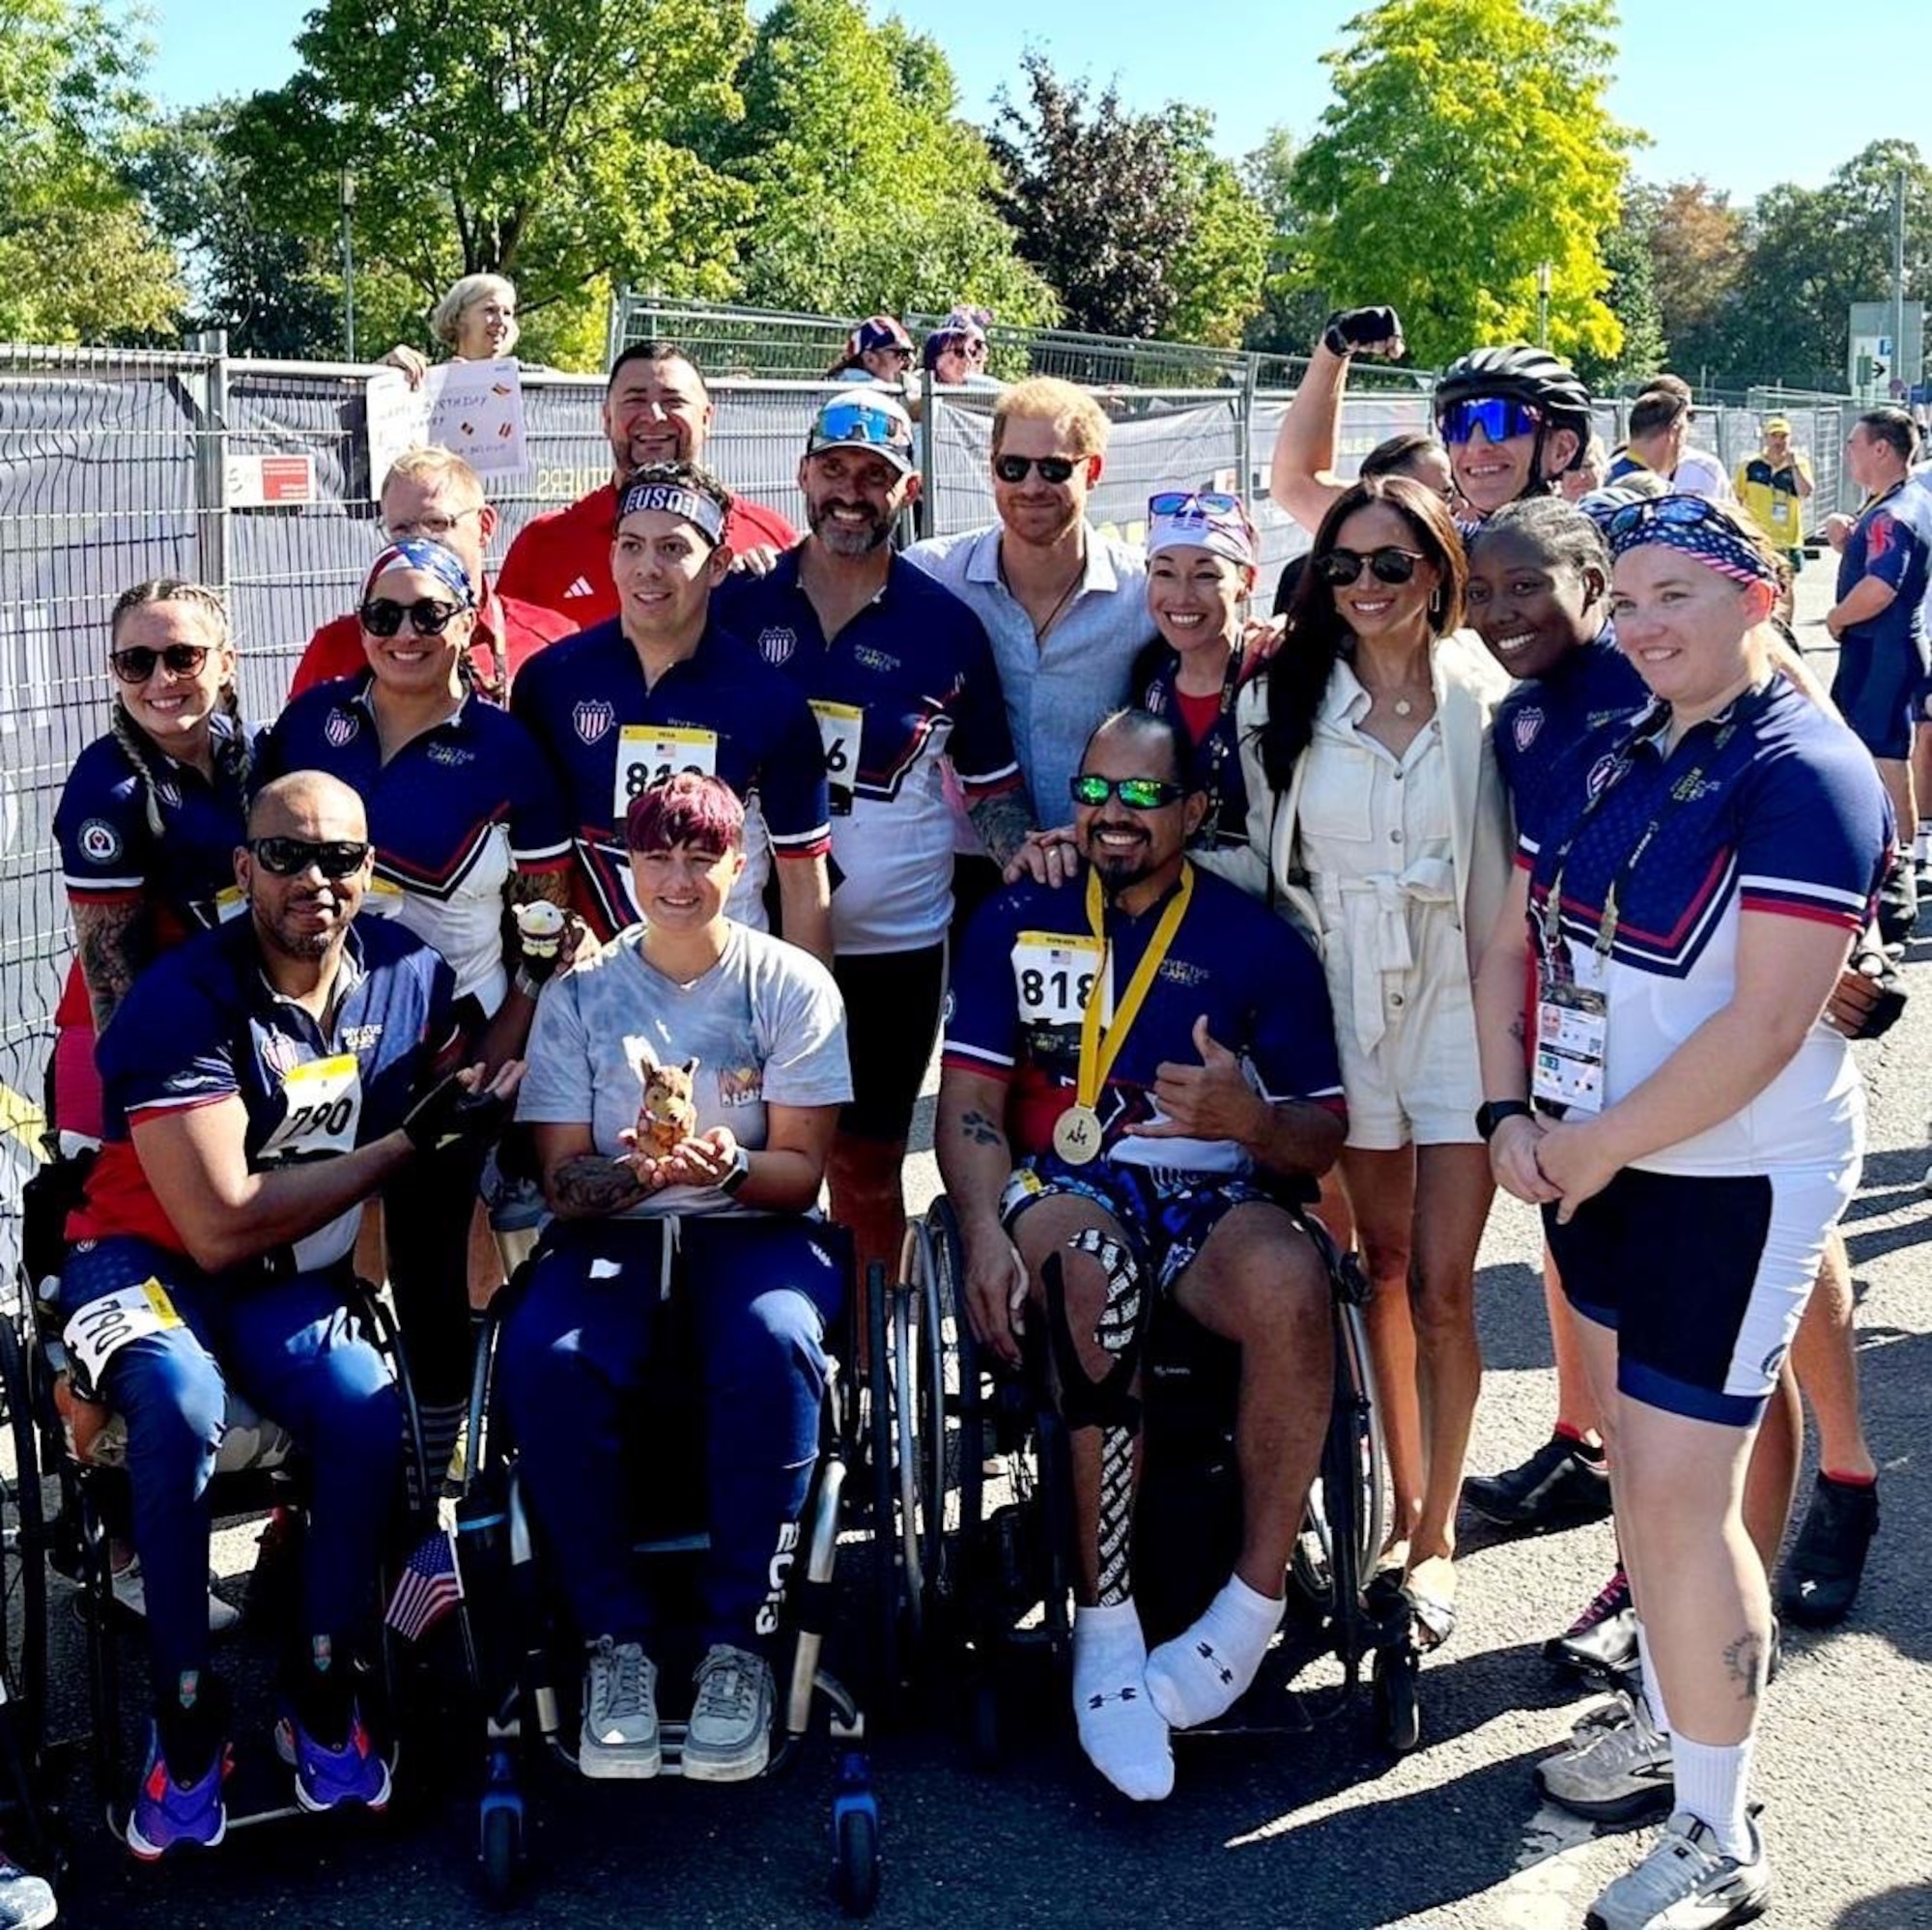 U.S. Air Force Senior Master Sgt. Nicole Favuzza, 70th Operations Support Squadron senior enlisted leader, stands between Prince Harry, center, Duke of Sussex, and Meghan Markle, Duchess of Sussex, during the Invictus Games Düsseldorf 2023, Sept. 15, in Germany. The games welcomed around 500 competitors from 21 nations and believes in empowering individuals to reclaim their sense of purpose, identity, and future, transcending the boundaries of their injuries. In 2018, Favuzza was diagnosed with Adenoid Cystic Carcinoma, a rare and incurable form of cancer. (Courtesy photo)